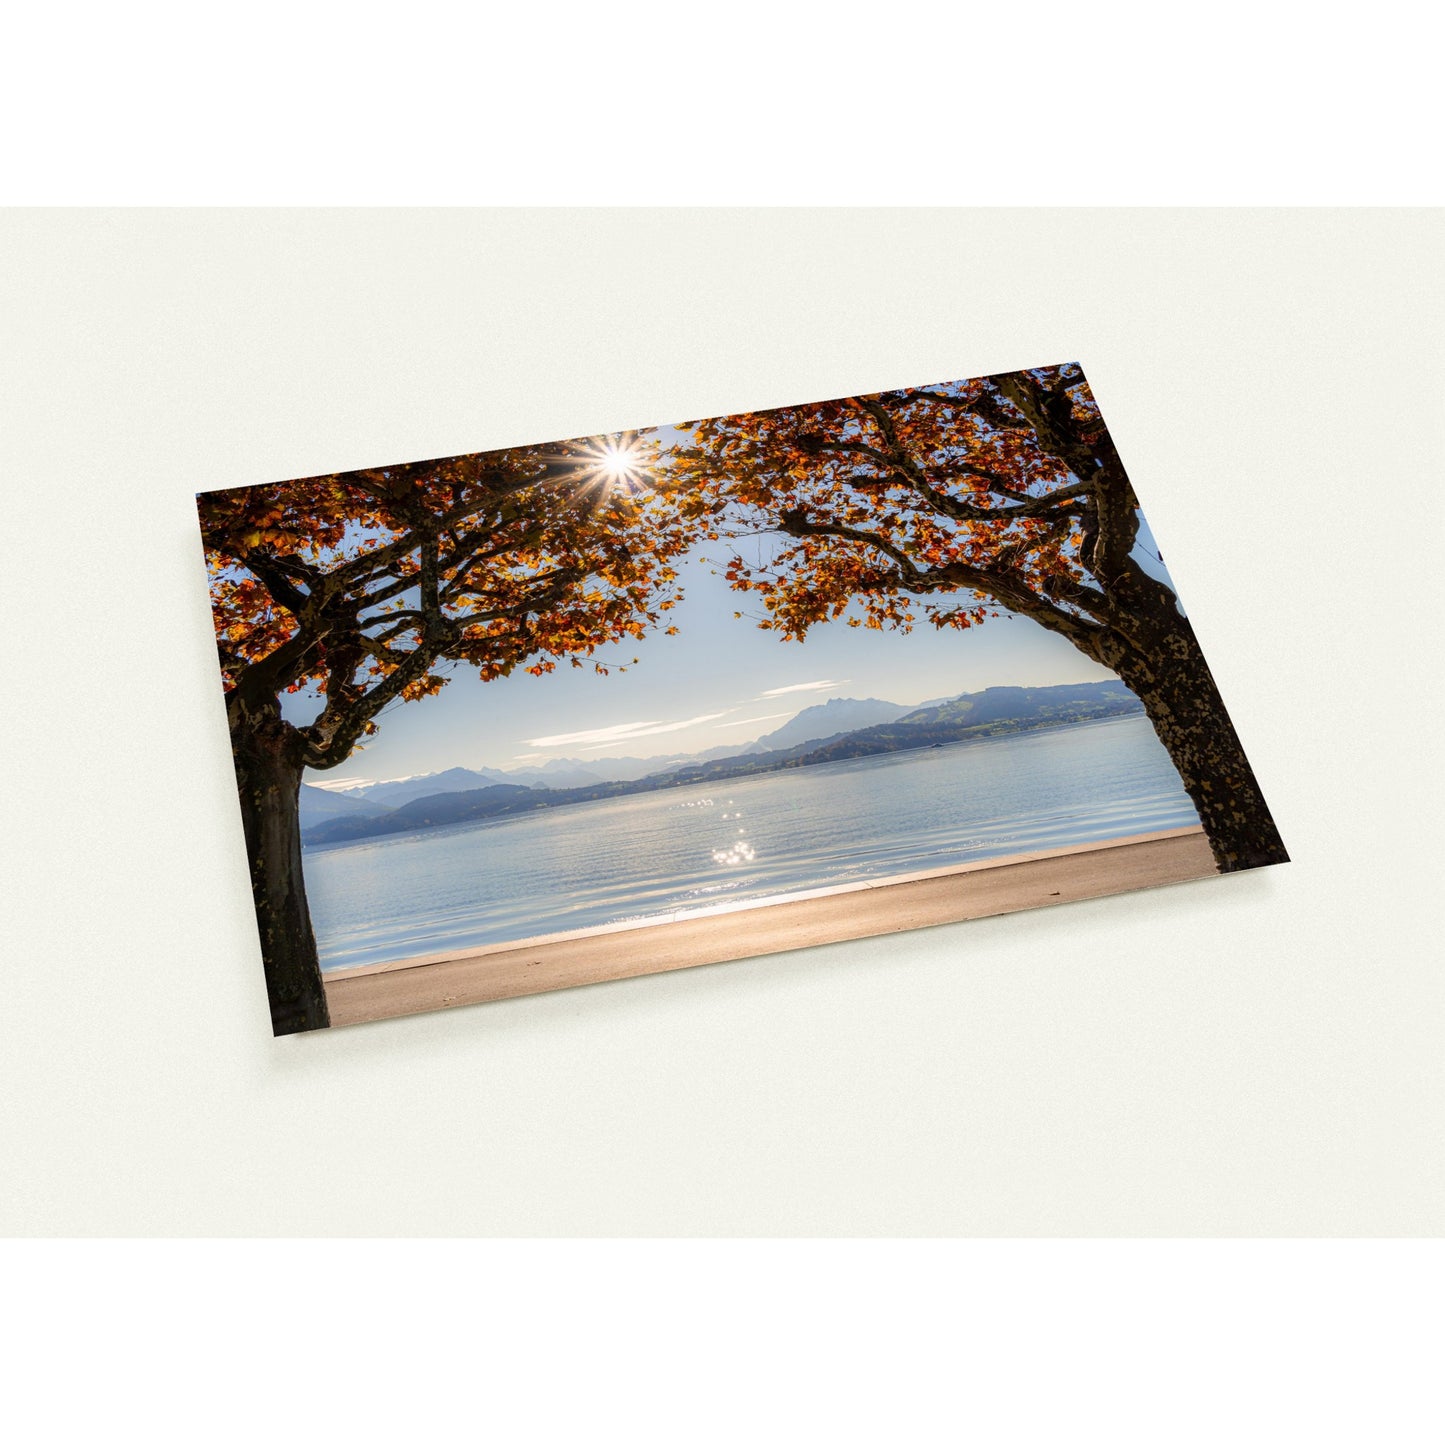 Autumn on Lake Zug with sun rays Set of 10 cards (2-sided, with envelopes)